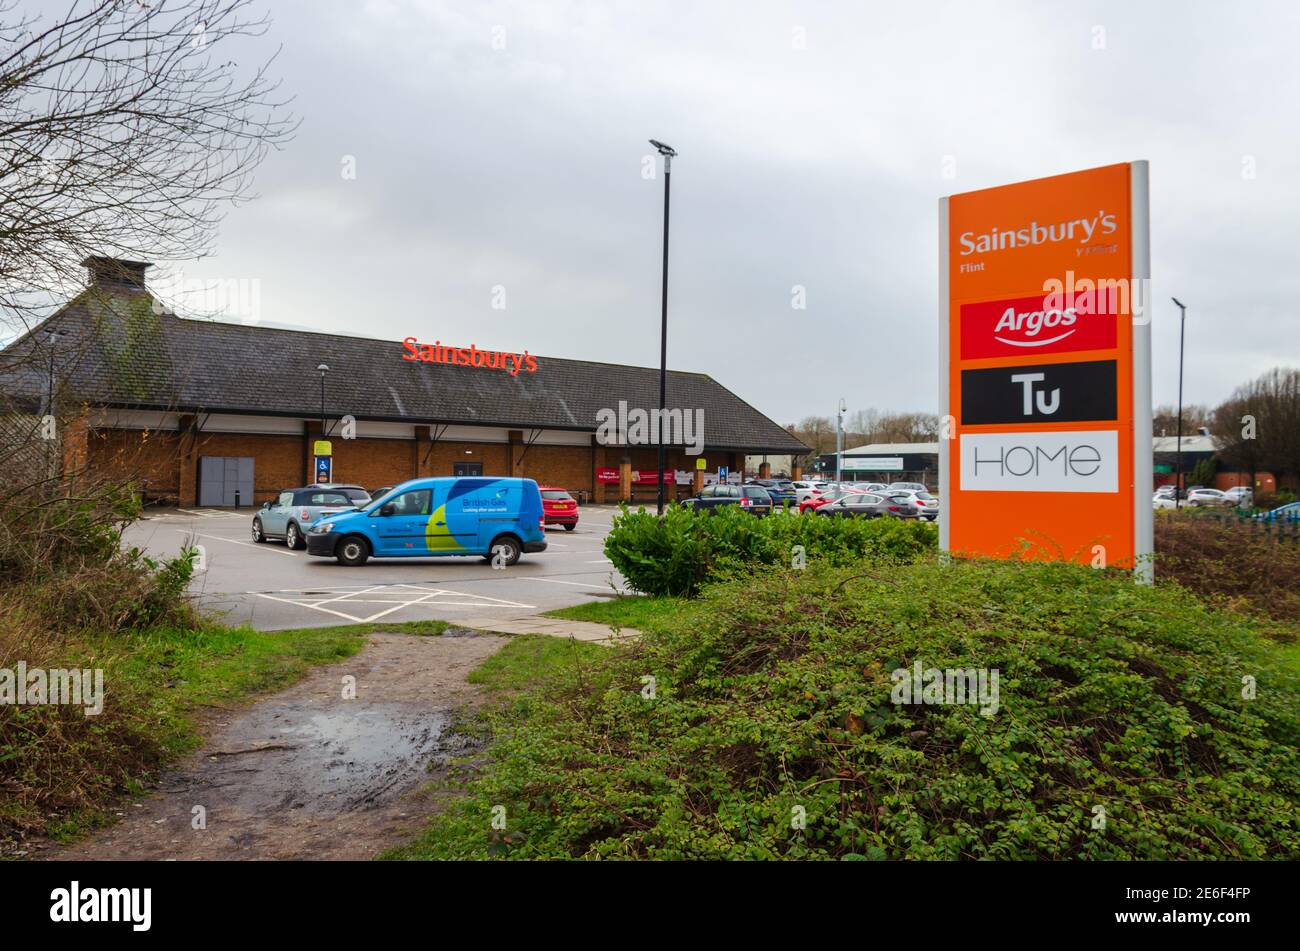 Flint; UK: Jan 28, 2021: Signage beside a Sainsbury's supermarket shows some of the instore brands, including Argos who recently relocated to inside t Stock Photo